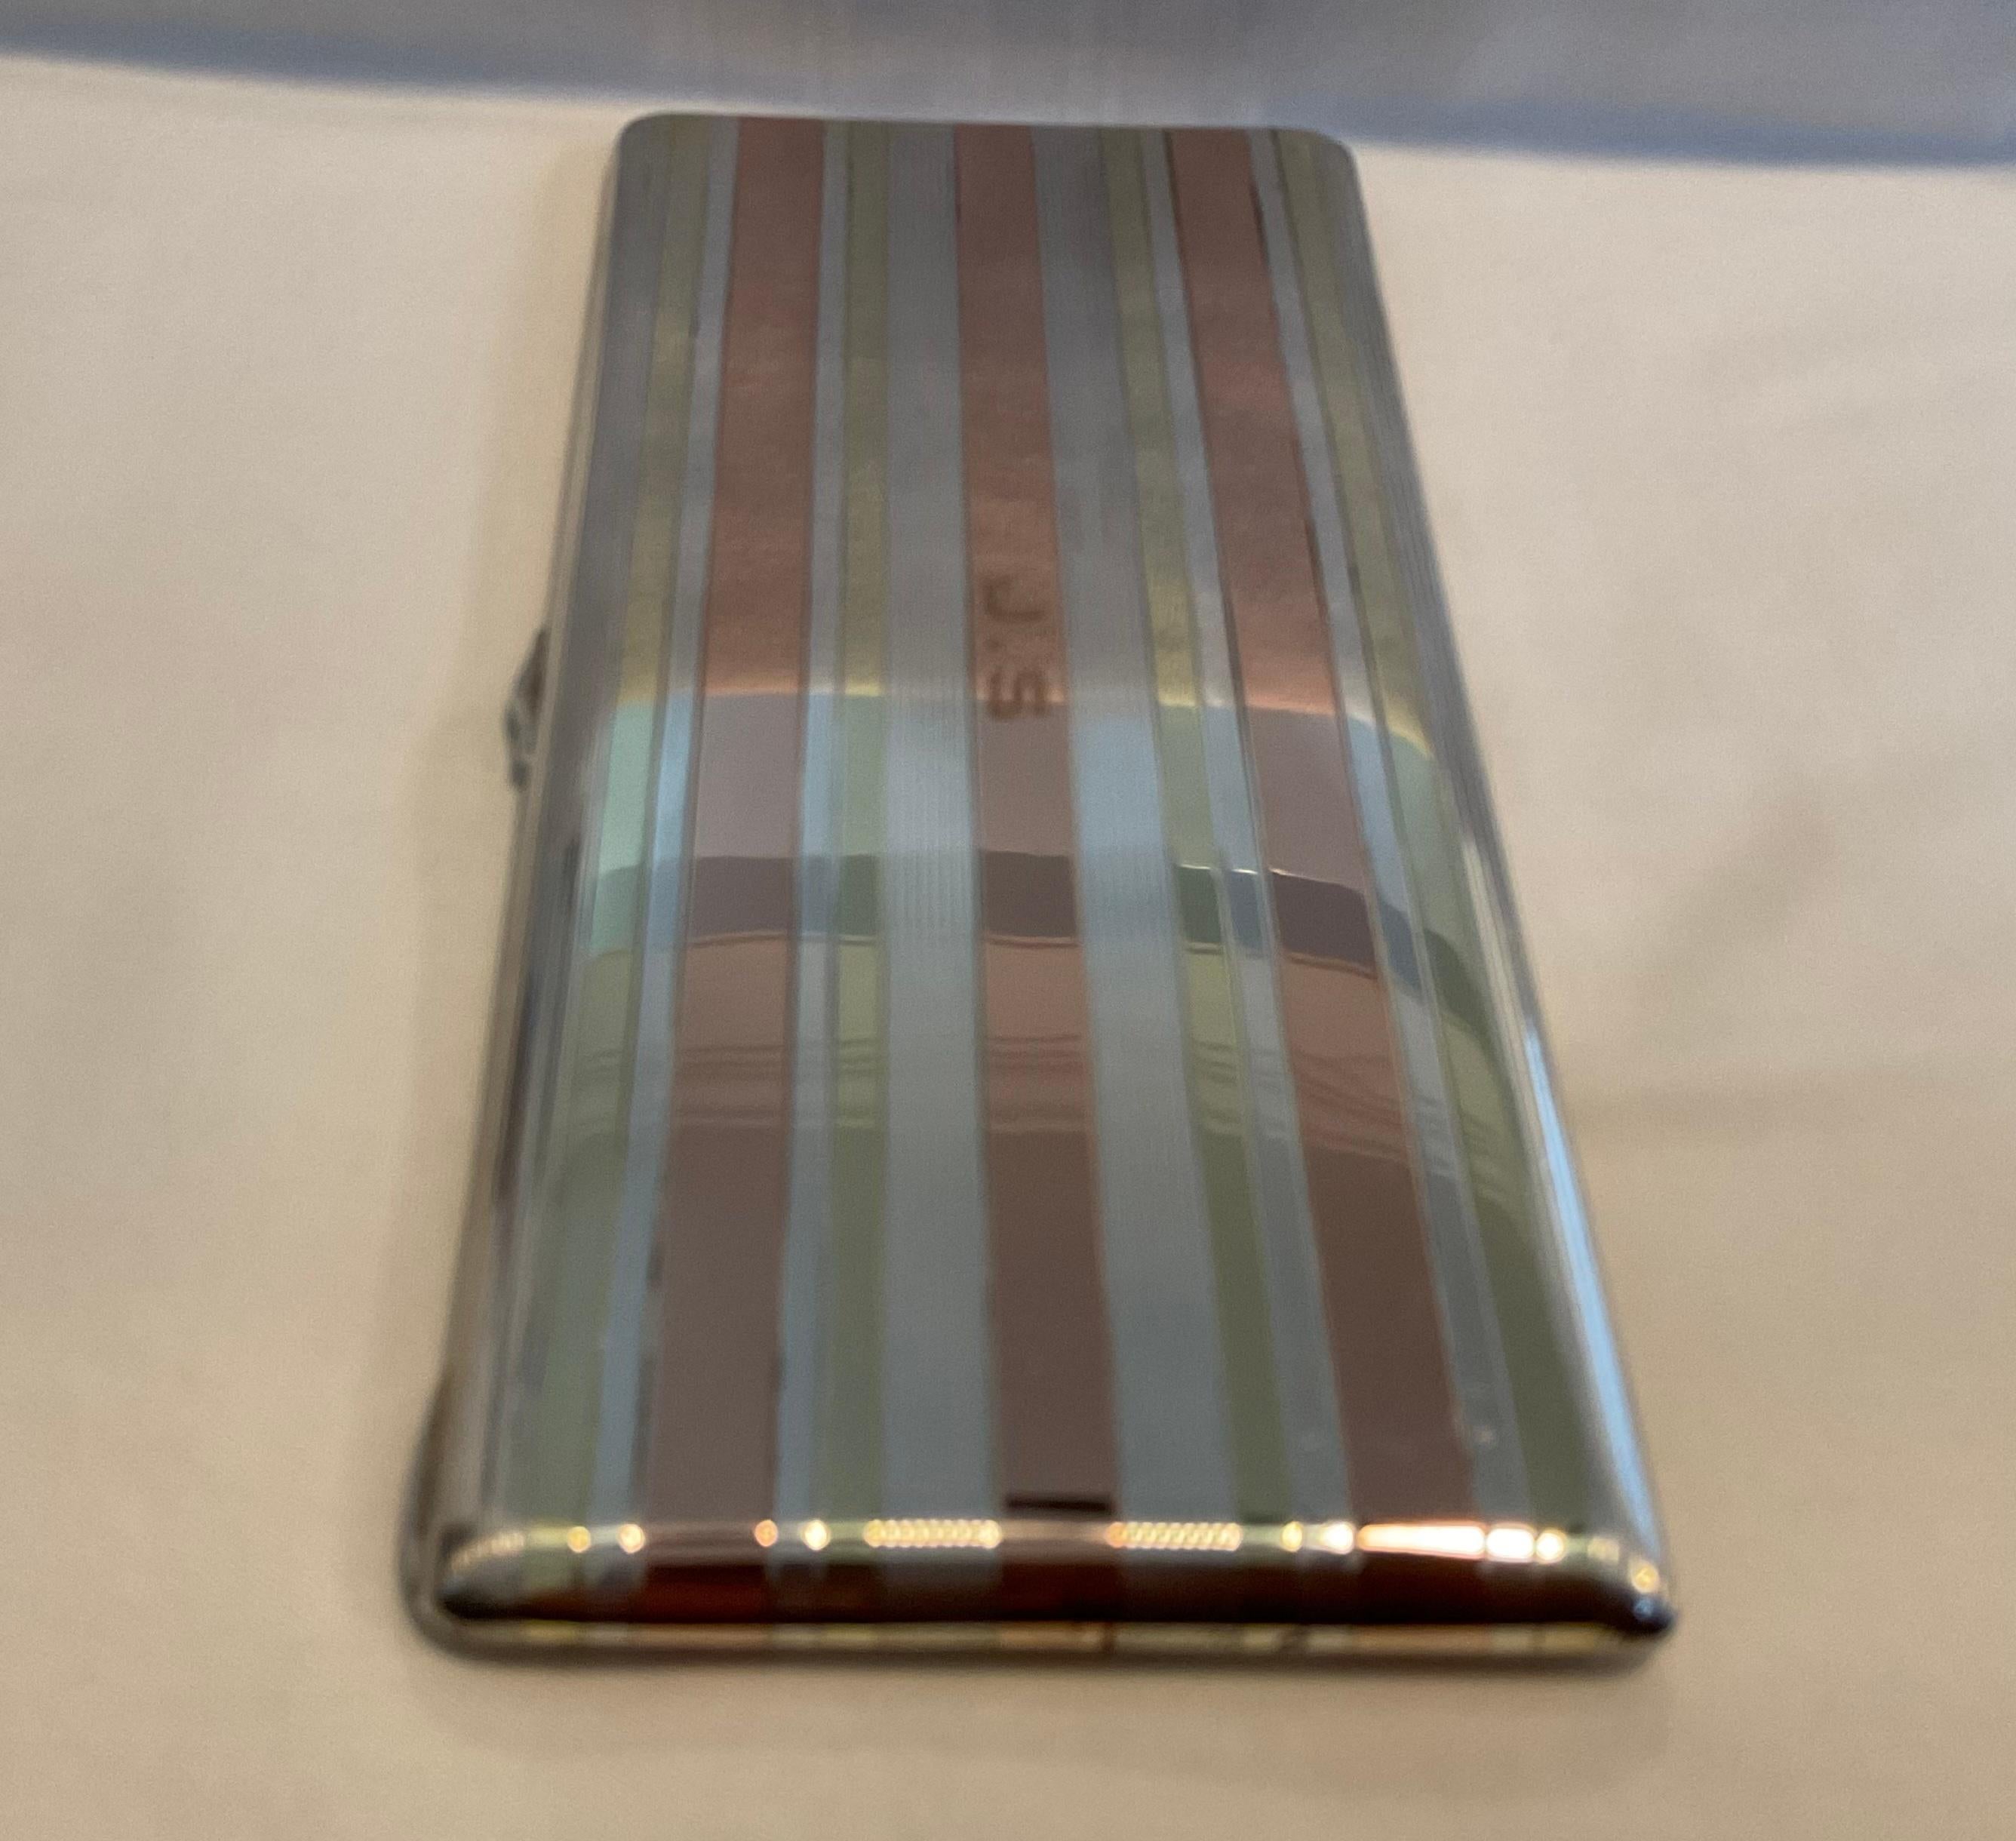 This cigarette case was crafted of solid sterling silver with rose gold lining on the exterior and 14K on the interior. The clasp and strong spring function as new and the case was made in the style of Cartier. It speaks of sophistication and style